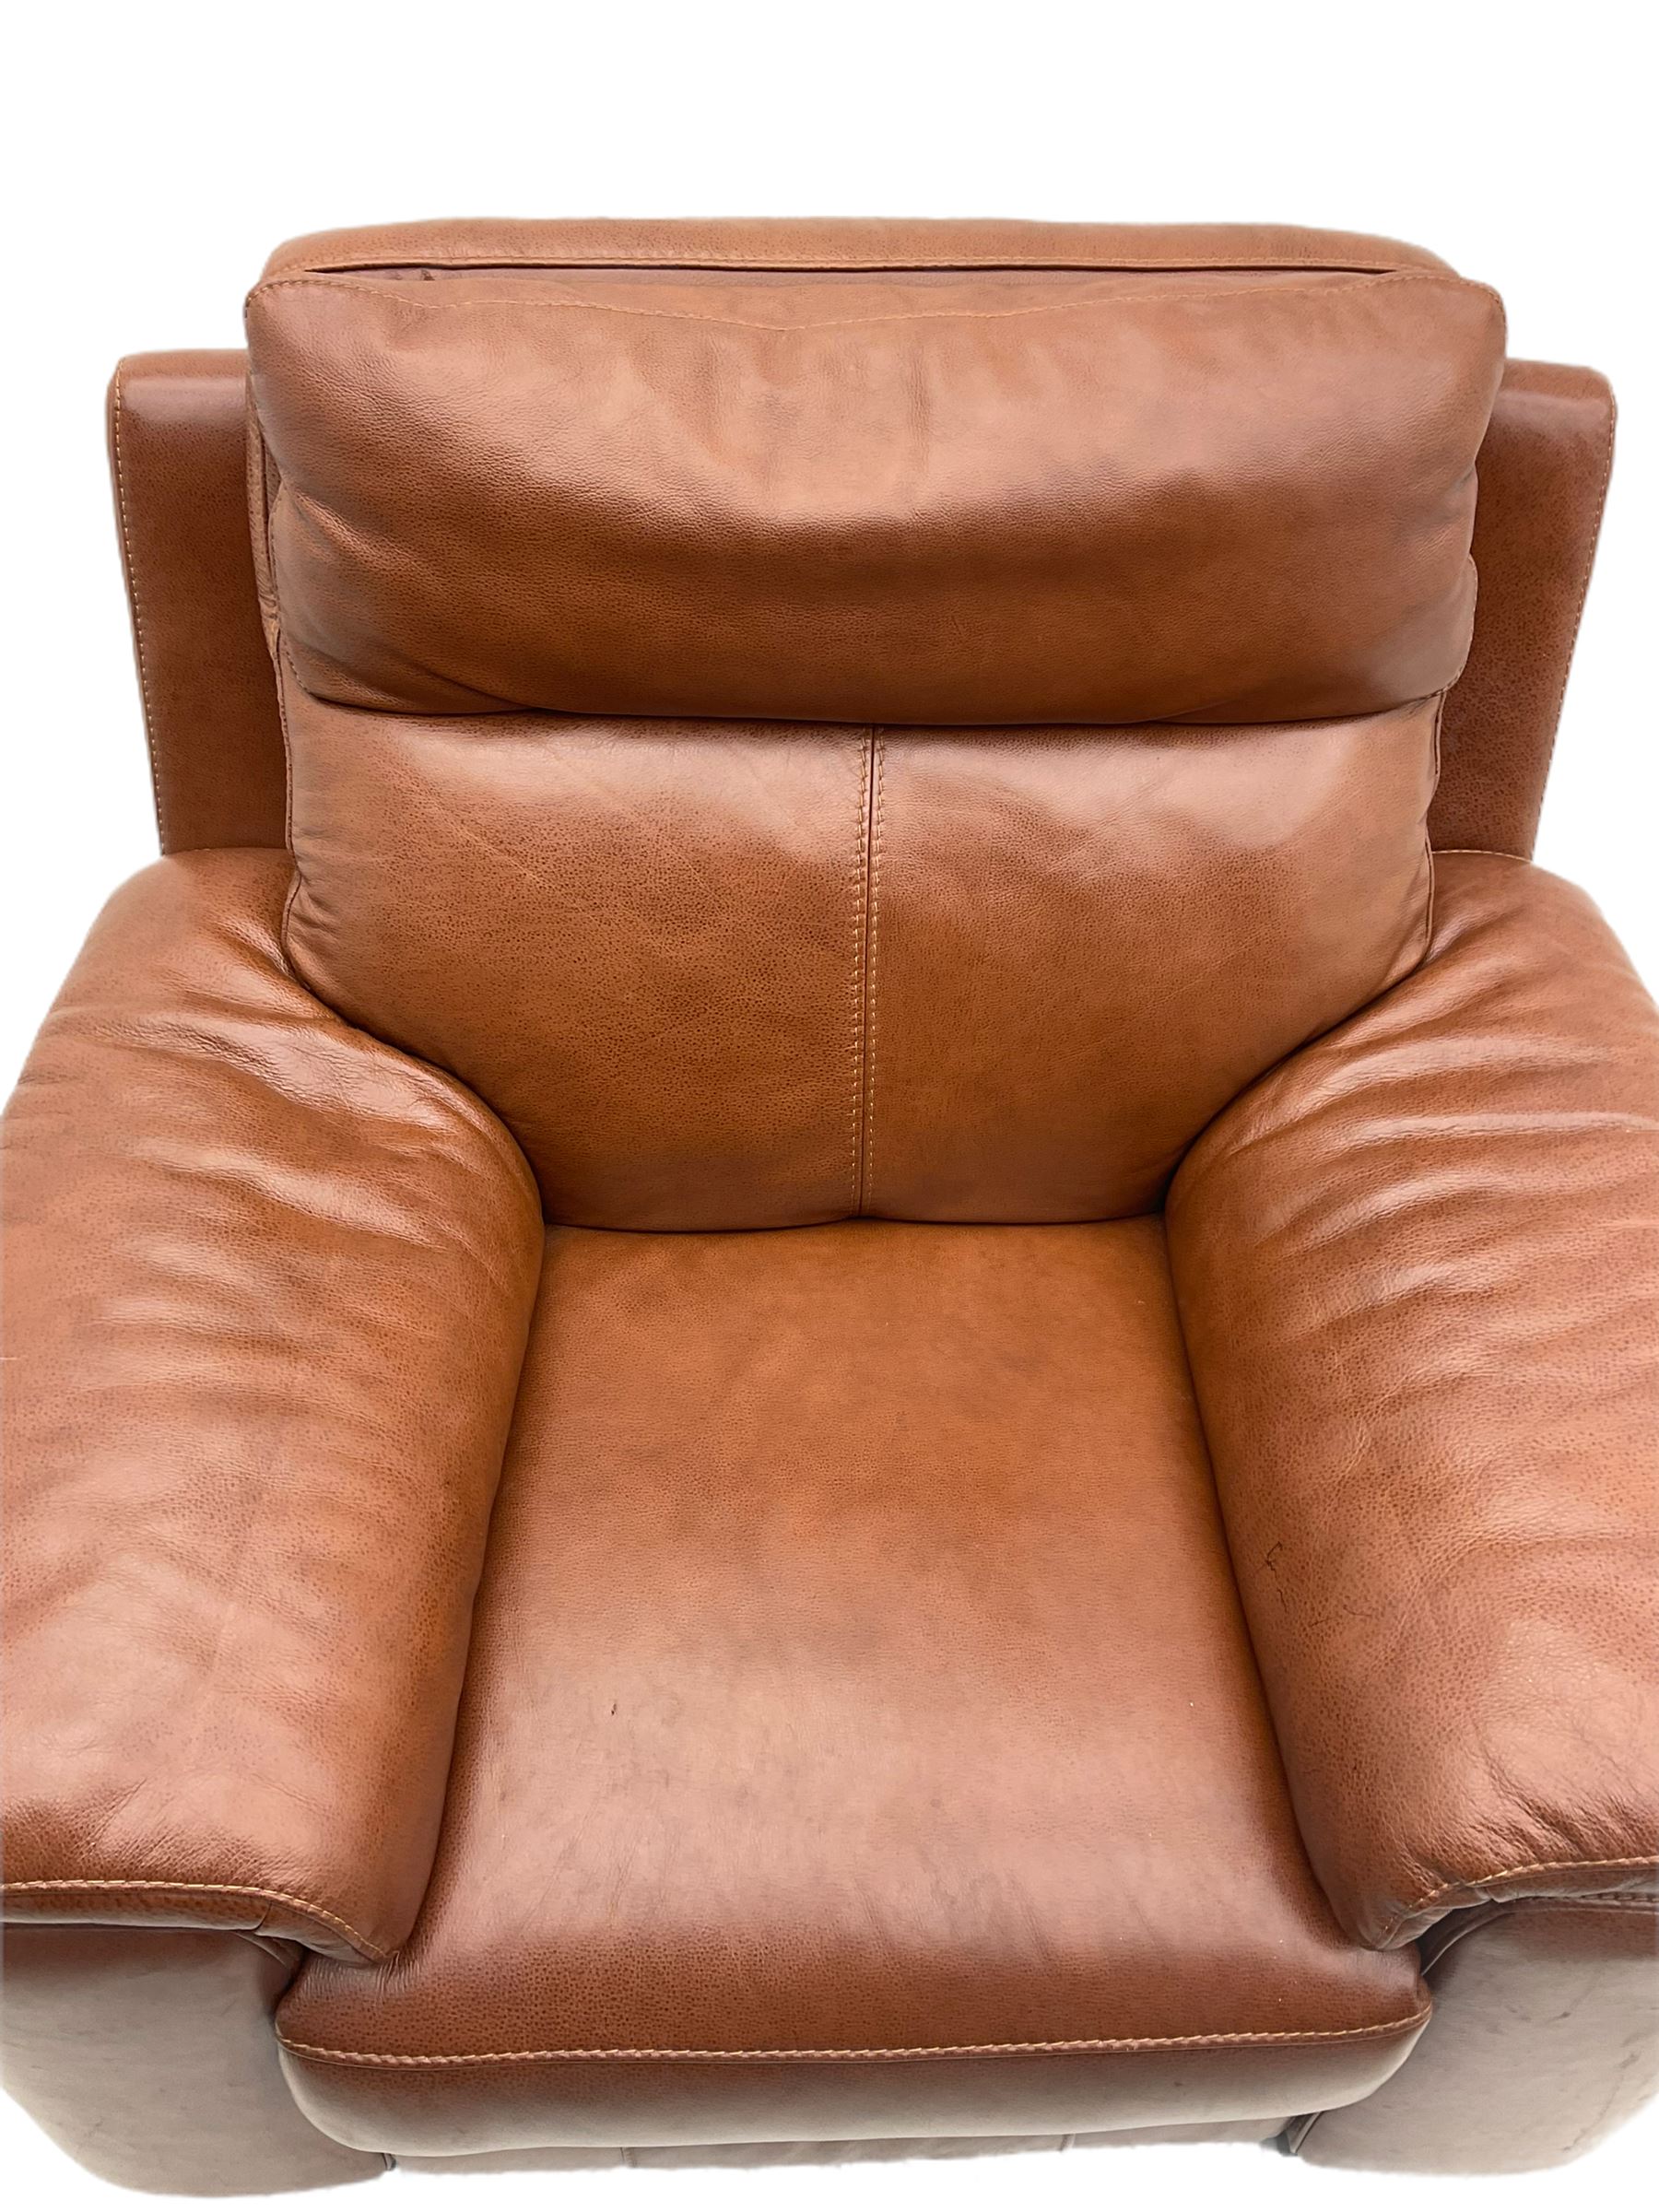 Three electric reclining sofa upholstered in tan leather - Image 16 of 23